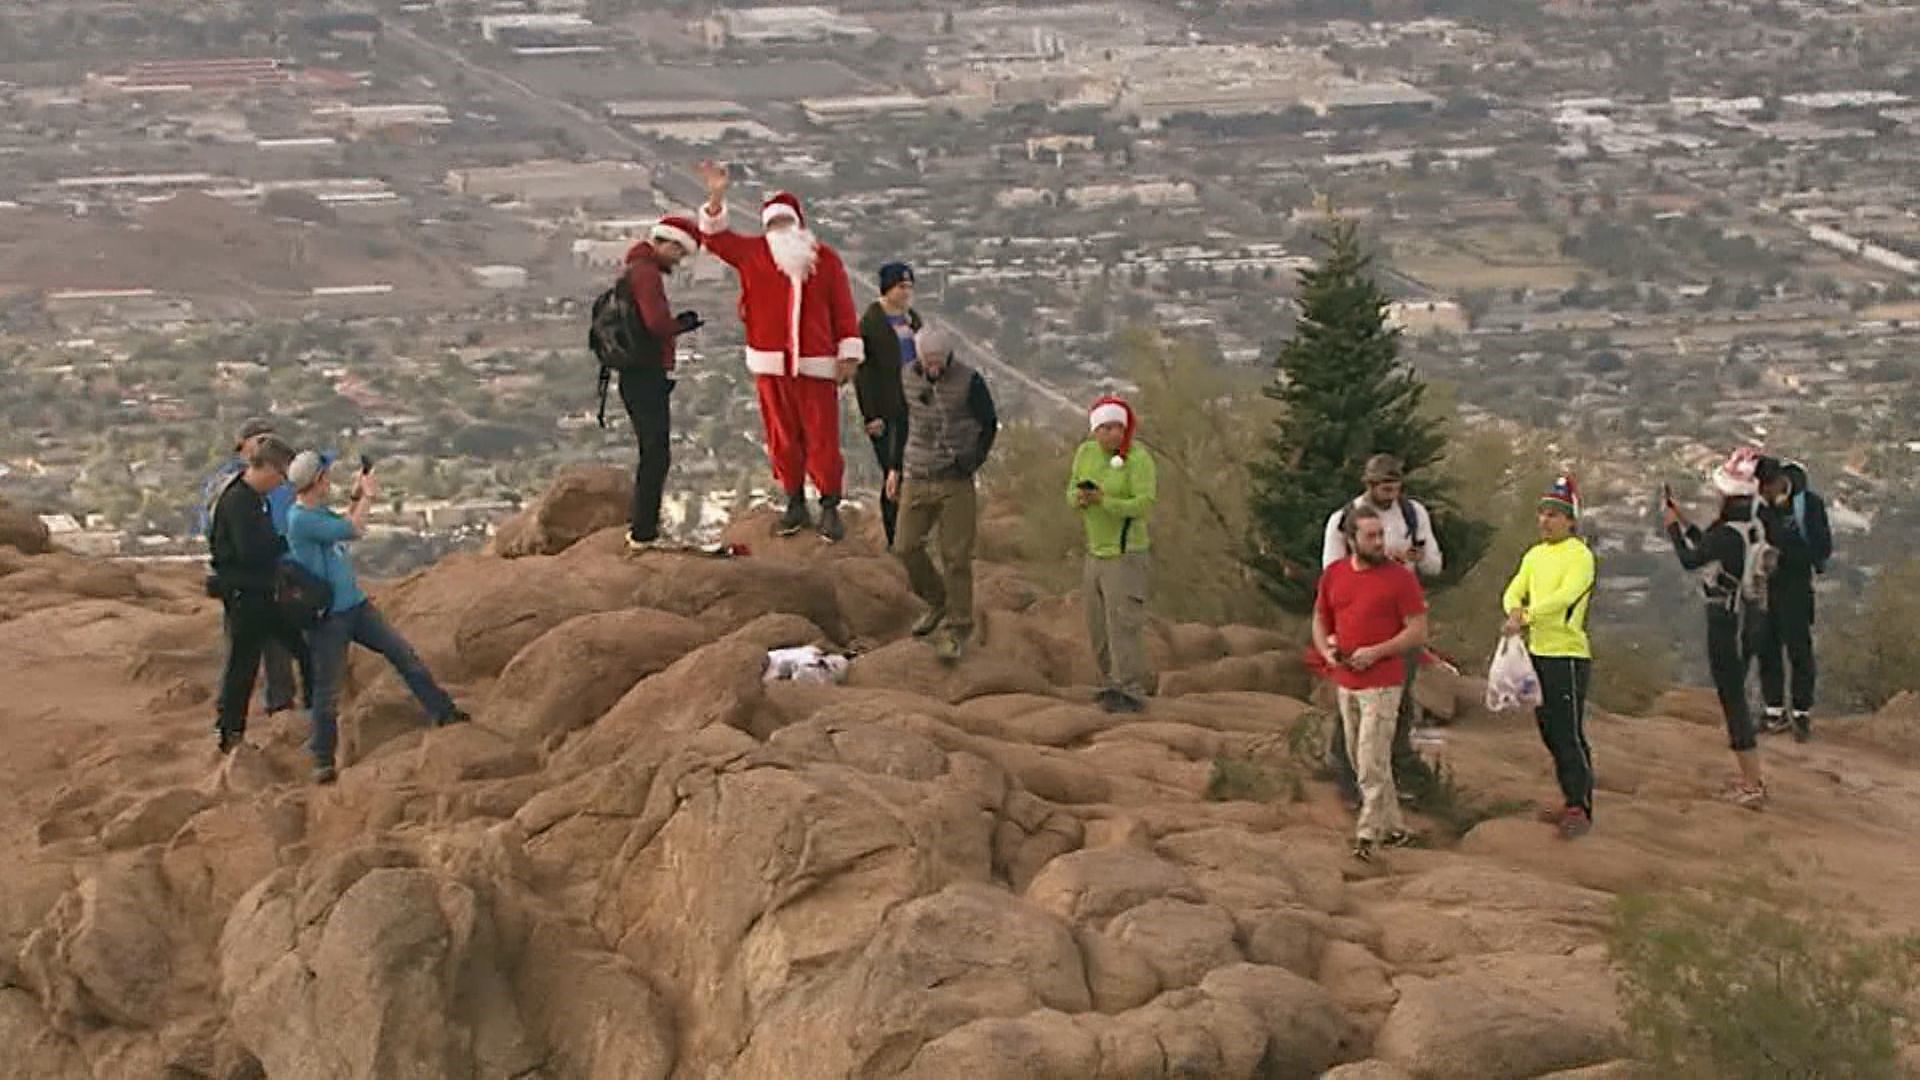 A controversial Christmas tree sits atop Camelback Mountain during the holiday season. Check out the lengths Santa and his elves are going to make sure that it stays there to bring some holiday cheer to Valley hikers.